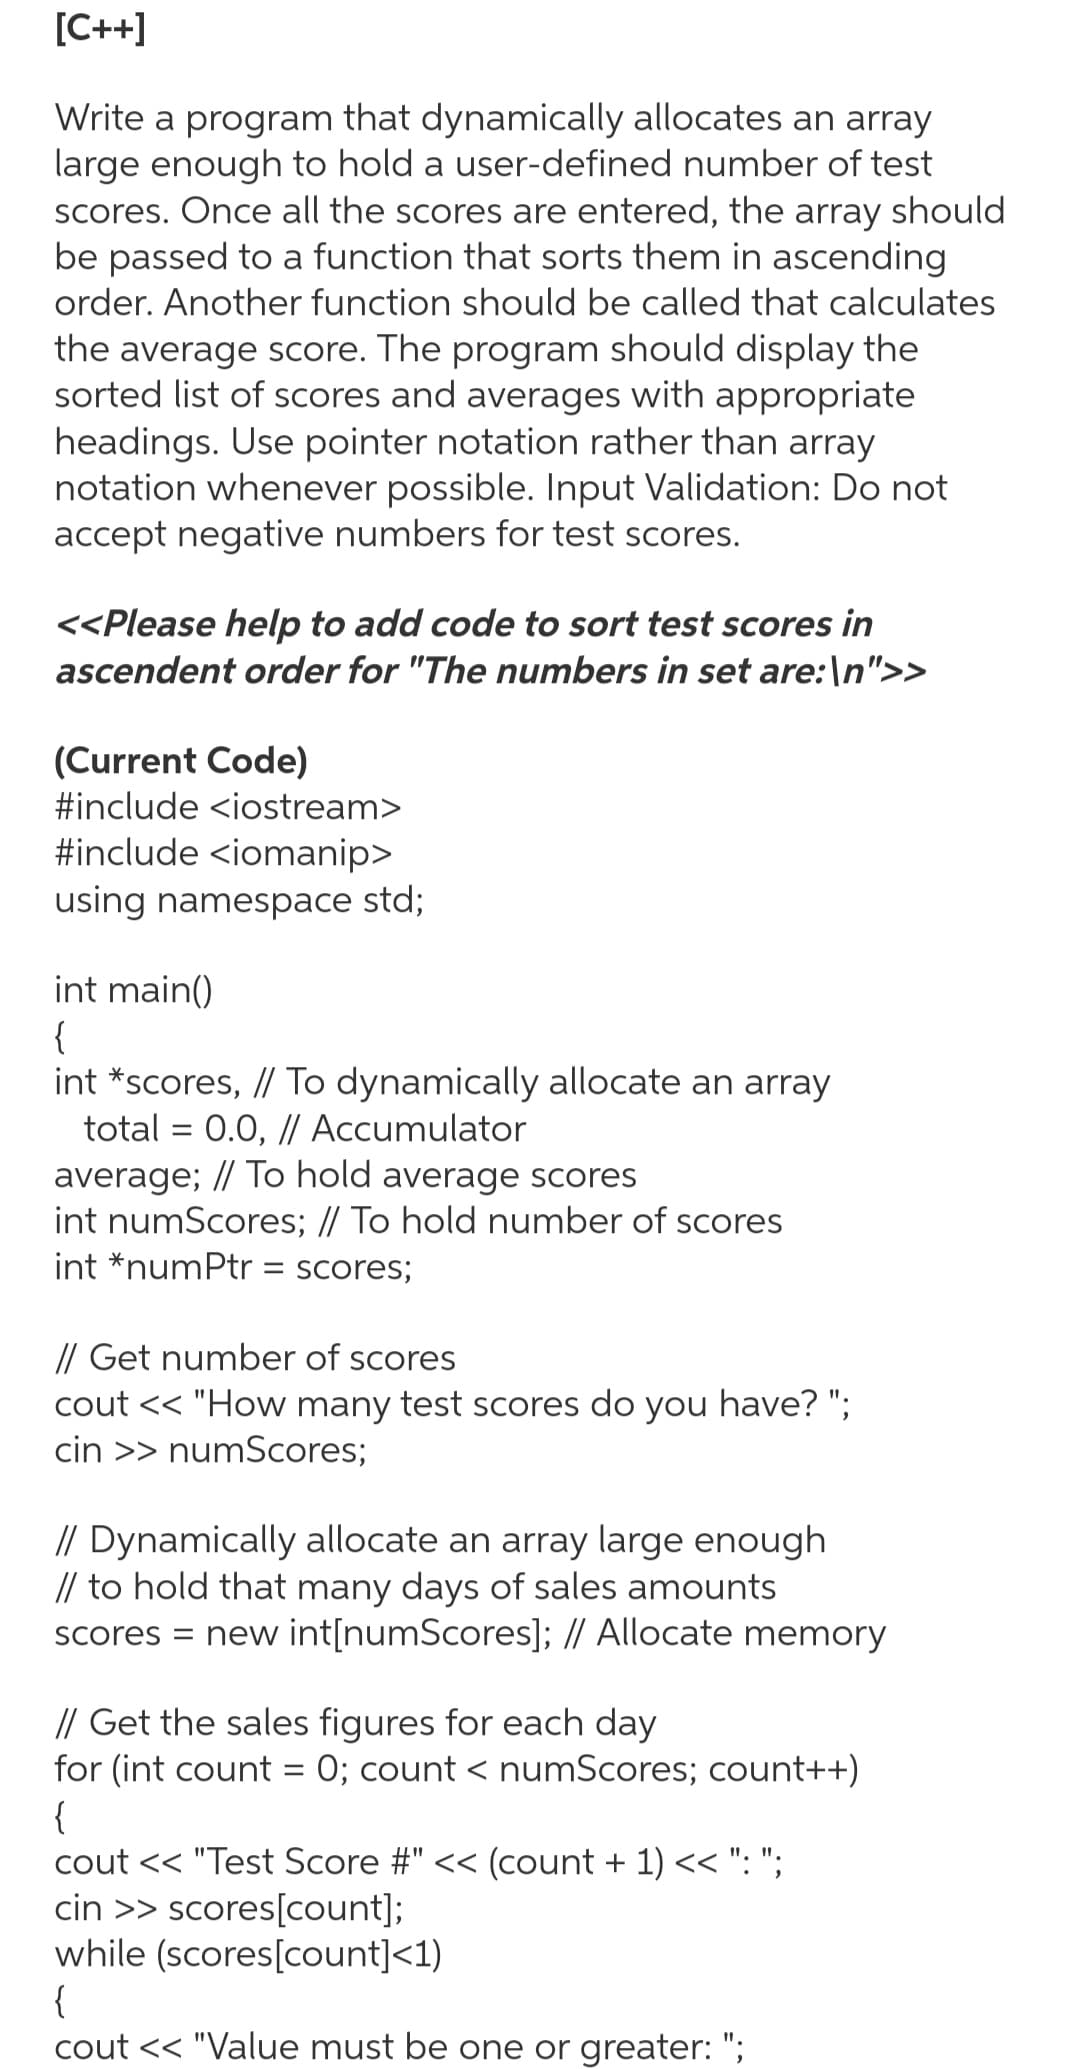 [C++]
Write a program that dynamically allocates an array
large enough to hold a user-defined number of test
scores. Once all the scores are entered, the array should
be passed to a function that sorts them in ascending
order. Another function should be called that calculates
the average score. The program should display the
sorted list of scores and averages with appropriate
headings. Use pointer notation rather than array
notation whenever possible. Input Validation: Do not
accept negative numbers for test scores.
<<Please help to add code to sort test scores in
ascendent order for "The numbers in set are: \n">>
(Current Code)
#include <iostream>
#include <iomanip>
using namespace std;
int main()
{
int *scores, // To dynamically allocate an array
total = 0.0, // Accumulator
average; // To hold average scores
int numScores; // To hold number of scores
int *numPtr = scores;
// Get number of scores
cout << "How many test scores do you have? ";
cin >> numScores;
// Dynamically allocate an array large enough
// to hold that many days of sales amounts
scores = new int[numScores]; // Allocate memory
// Get the sales figures for each day
for (int count = 0; count < numScores; count++)
{
cout << "Test Score #" << (count + 1) << ": ";
cin >> scores[count];
while (scores[count]<1)
{
cout << "Value must be one or greater: ";